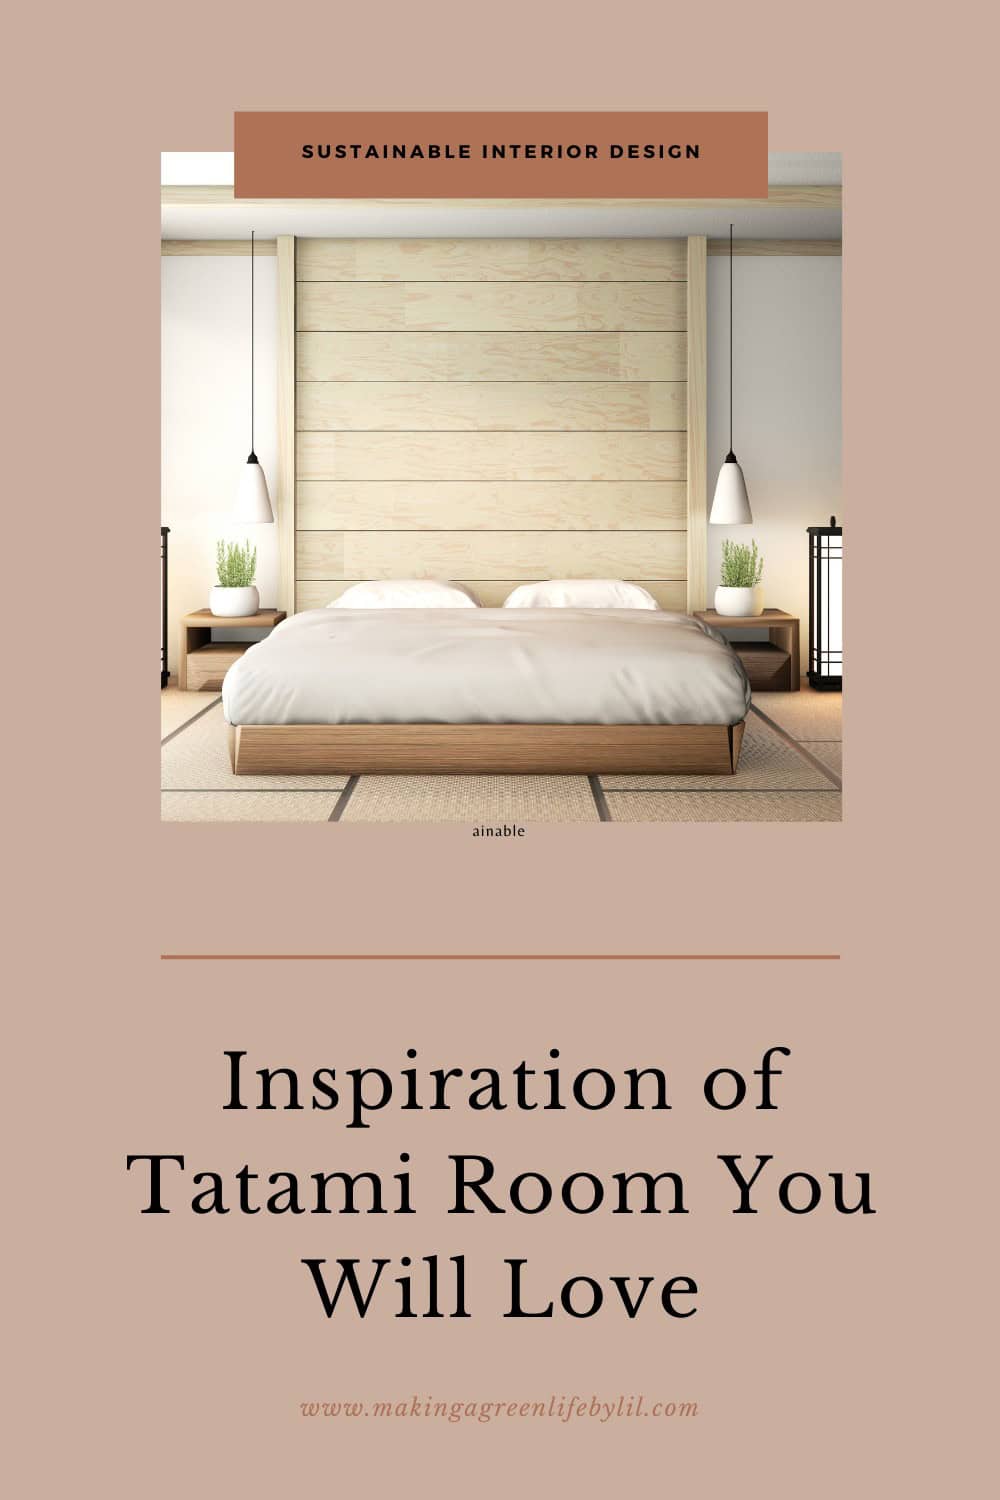 inspiration of tatami room you will love